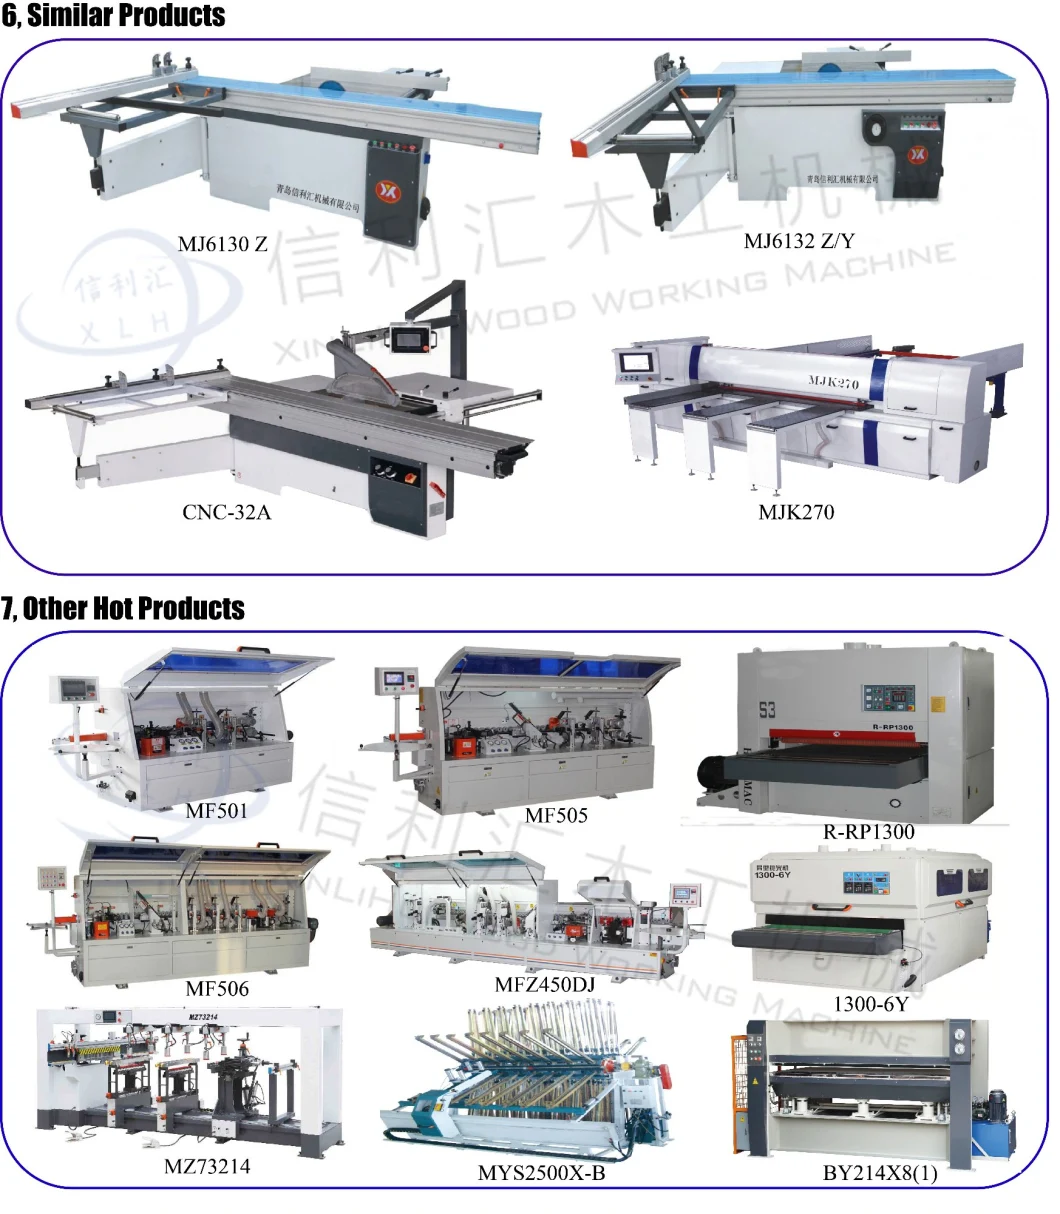 Manual Adjust Angle Saw Can Tilt 45-90 Degrees Saw for Wood Sheet Furniture Woodworking Machinery